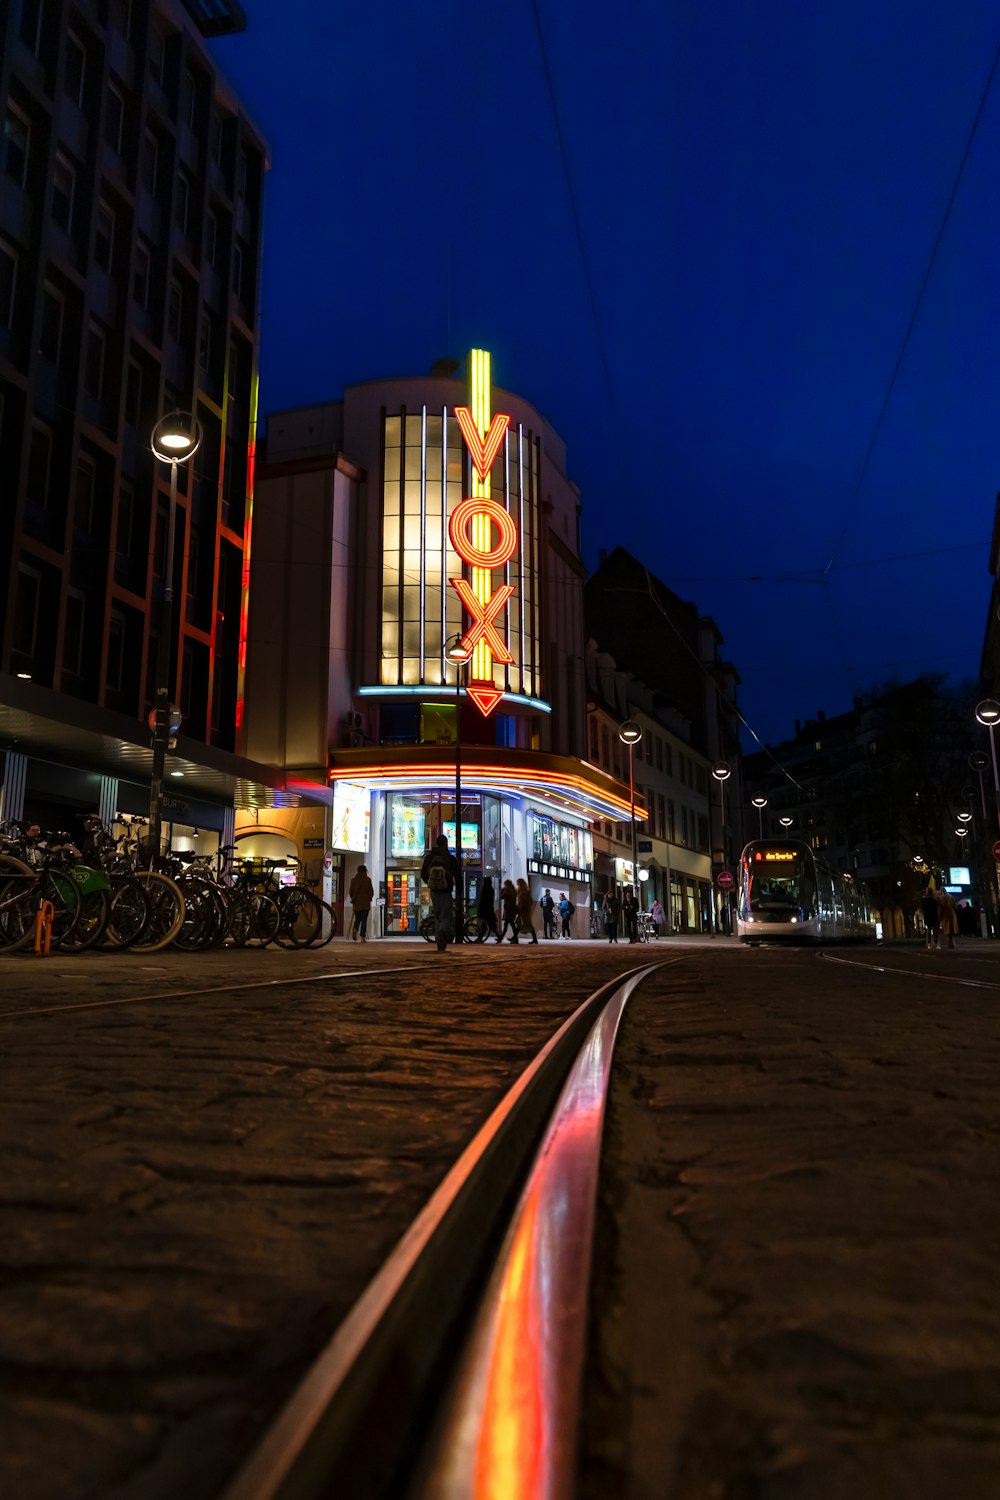 a train track in front of a building at night